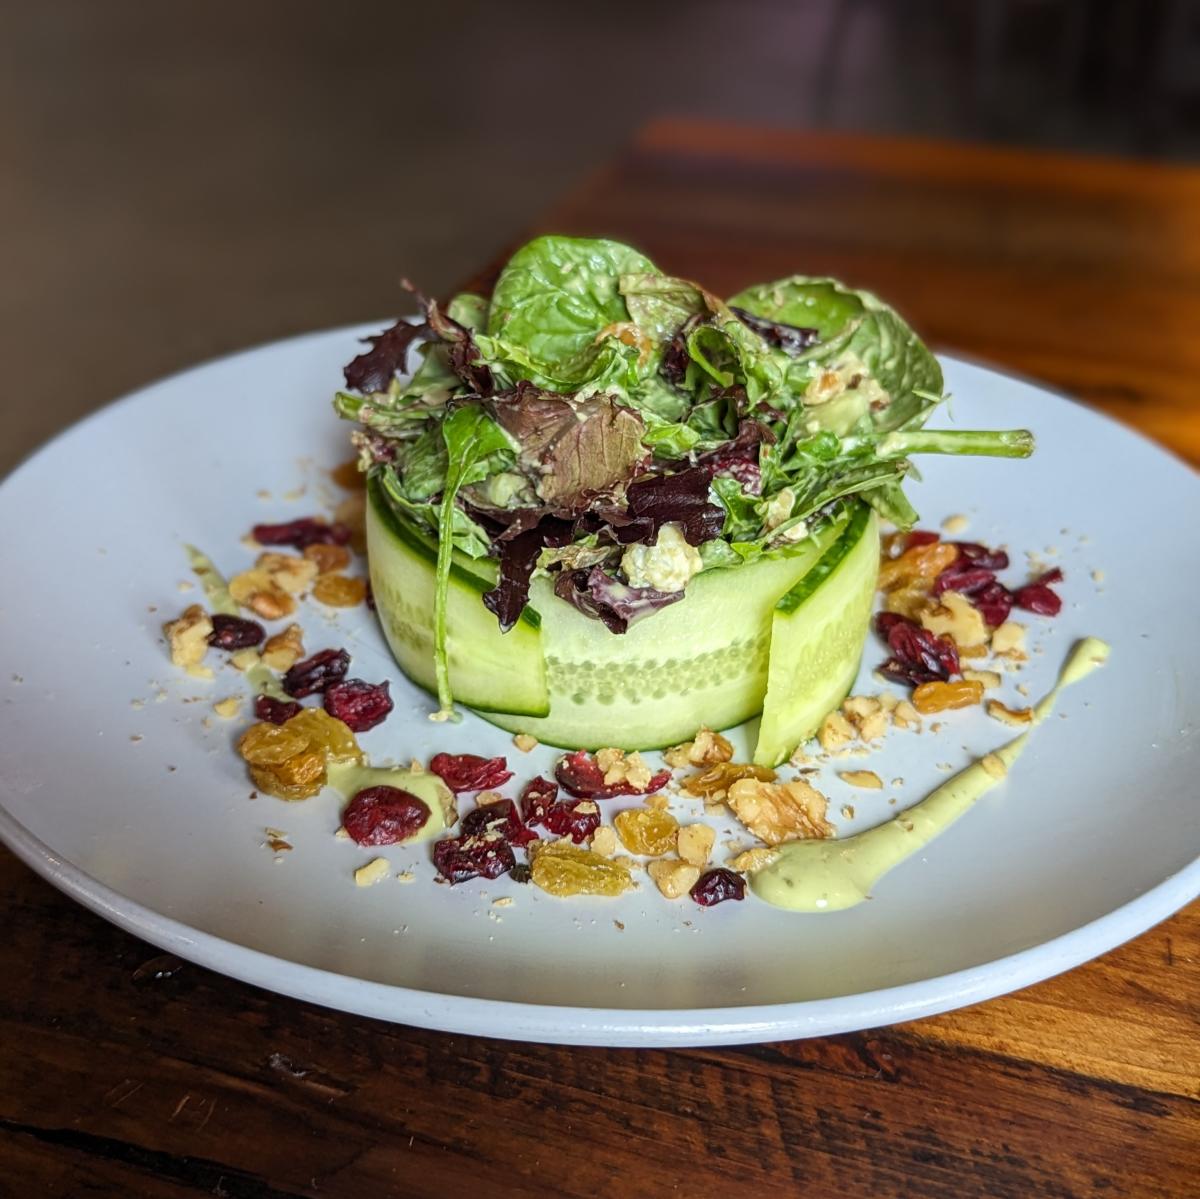 Image is of Shiners Green Machine salad which is a small salad that is wrapped together by a cucumber with raisins and dressing surrounding it.